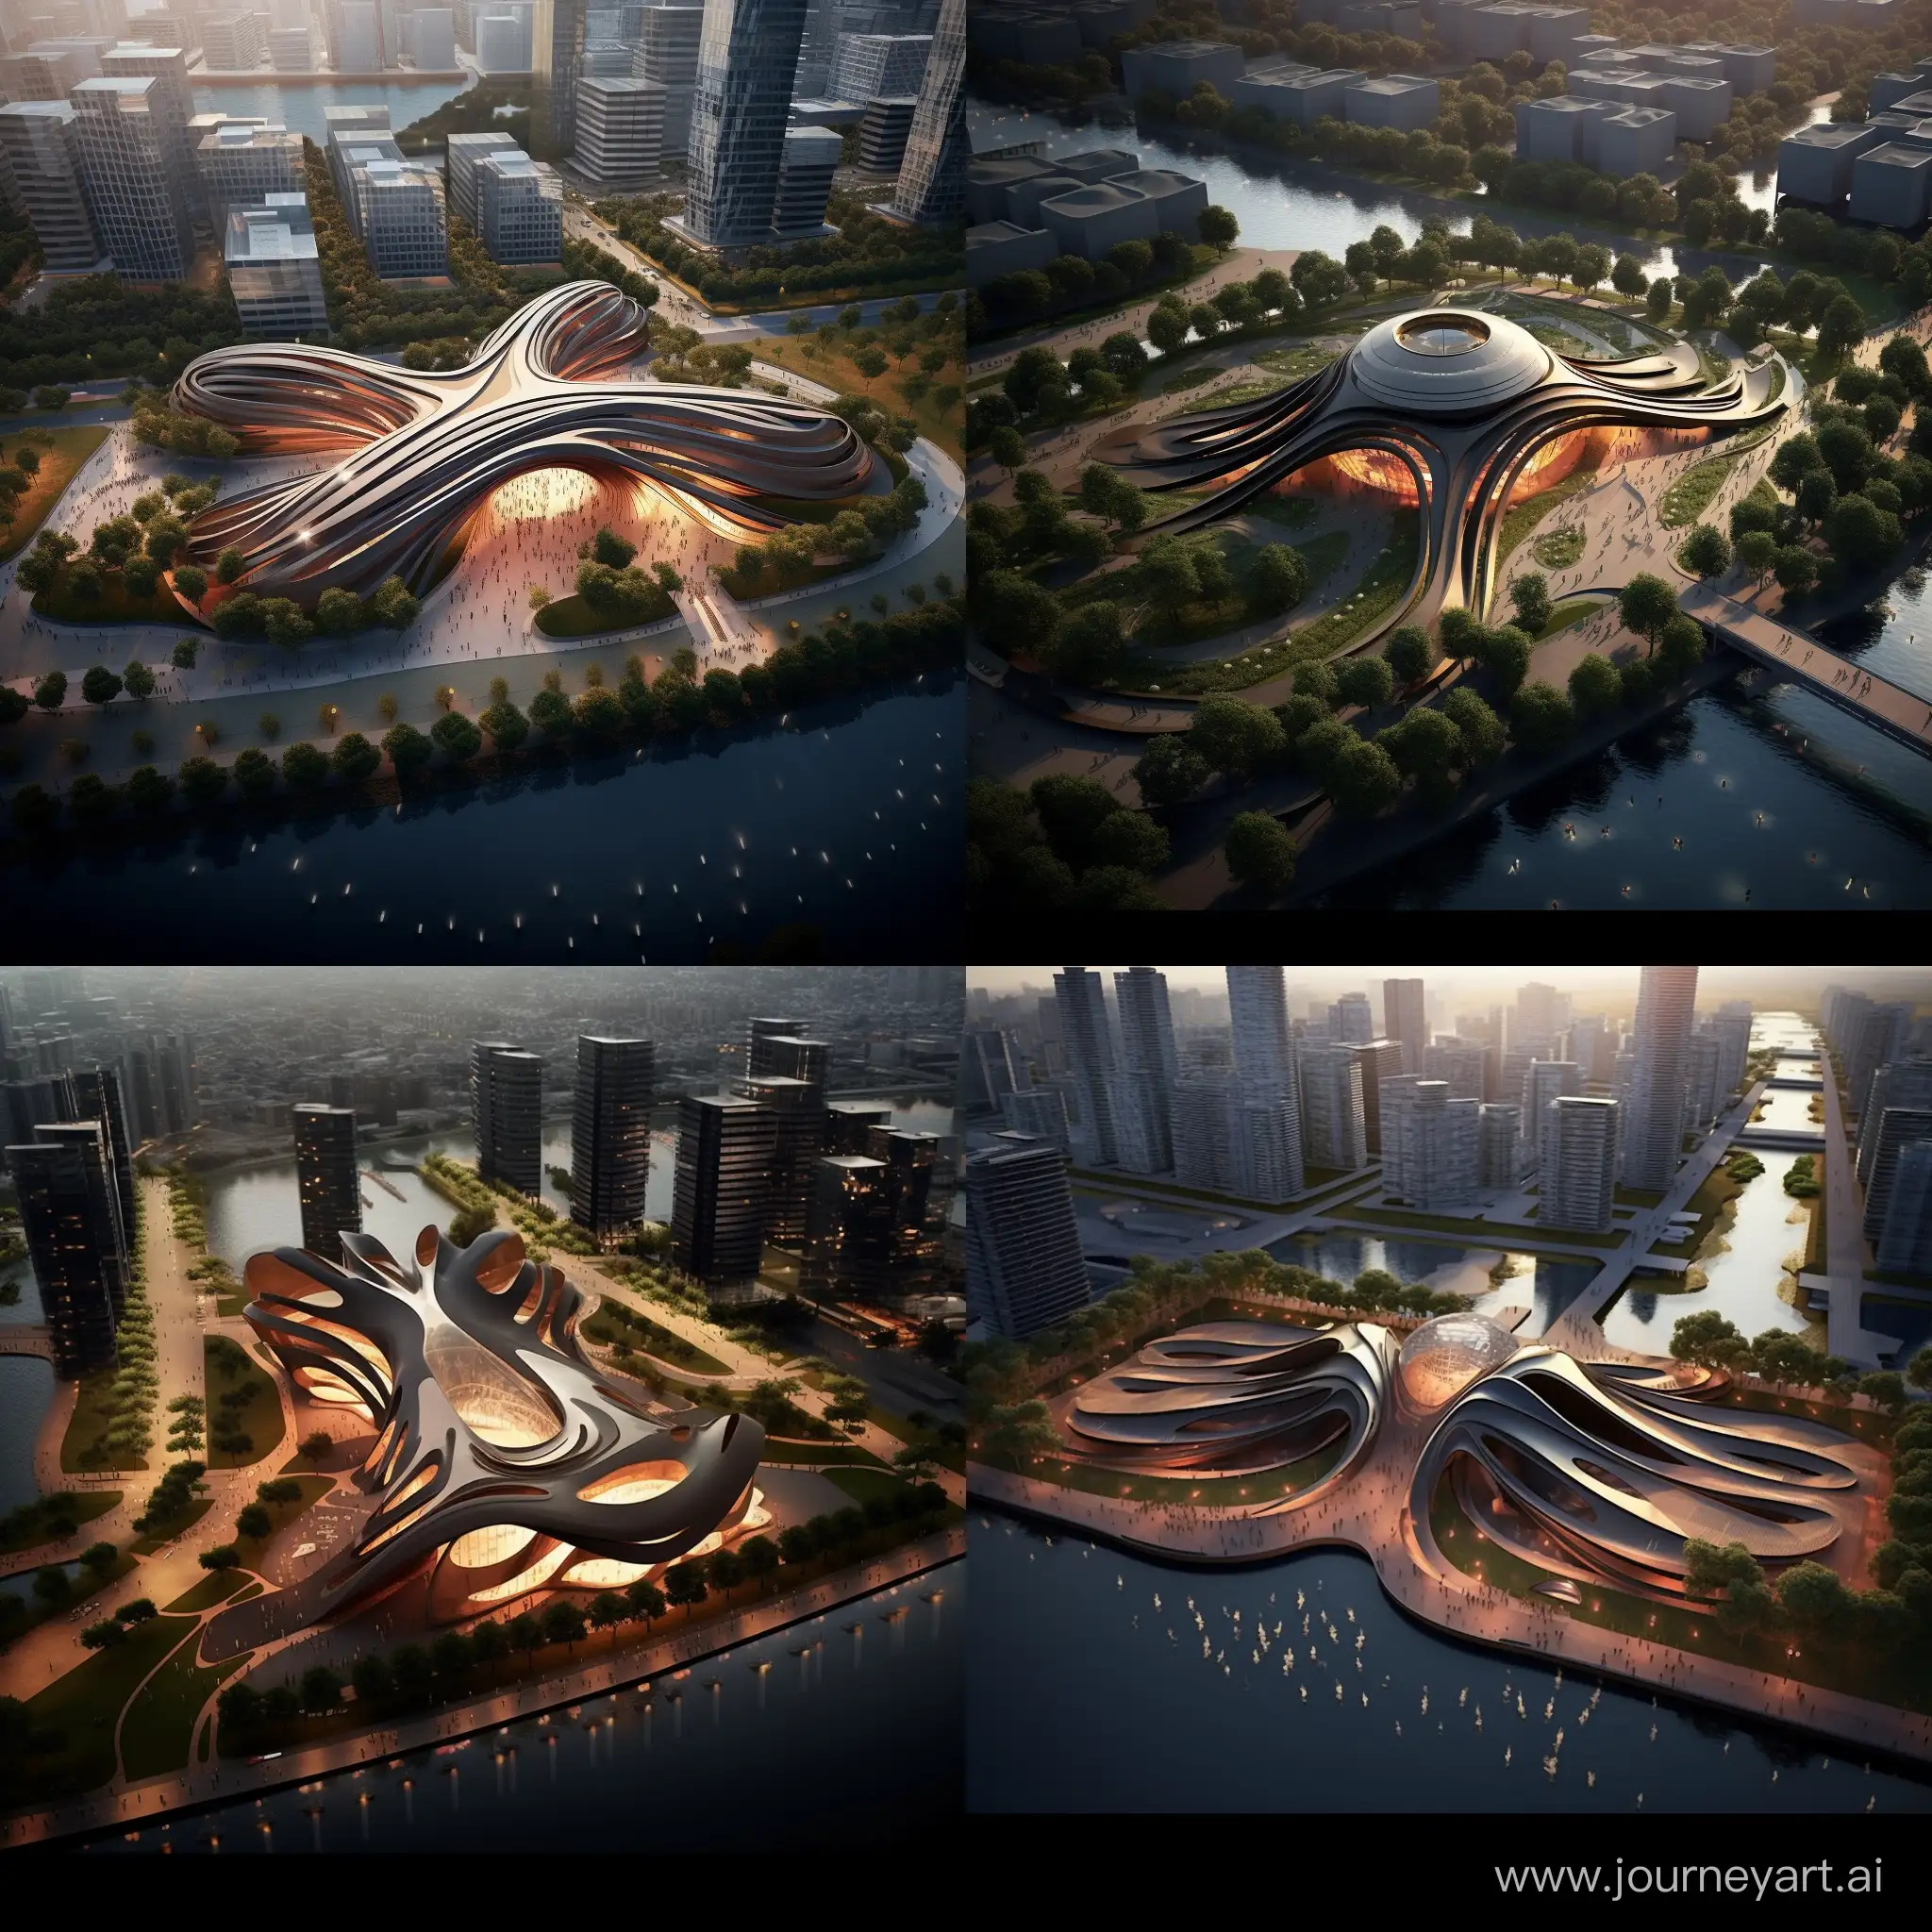 /imagine prompt: https://s.mj.run/dVakdShNkPY urban park on the water,aerial view, fluid and curved forms, black and metallic leather, sensation of movement, dynamism, carbon fiber, futuristic sensation,modern, integration of technology,modular design, set of LED lights, ergonomics, attractive, eye-Catching,abstract shapes,curved, sculptural, organic shapes in the style of the movie Blade Runner panorama 